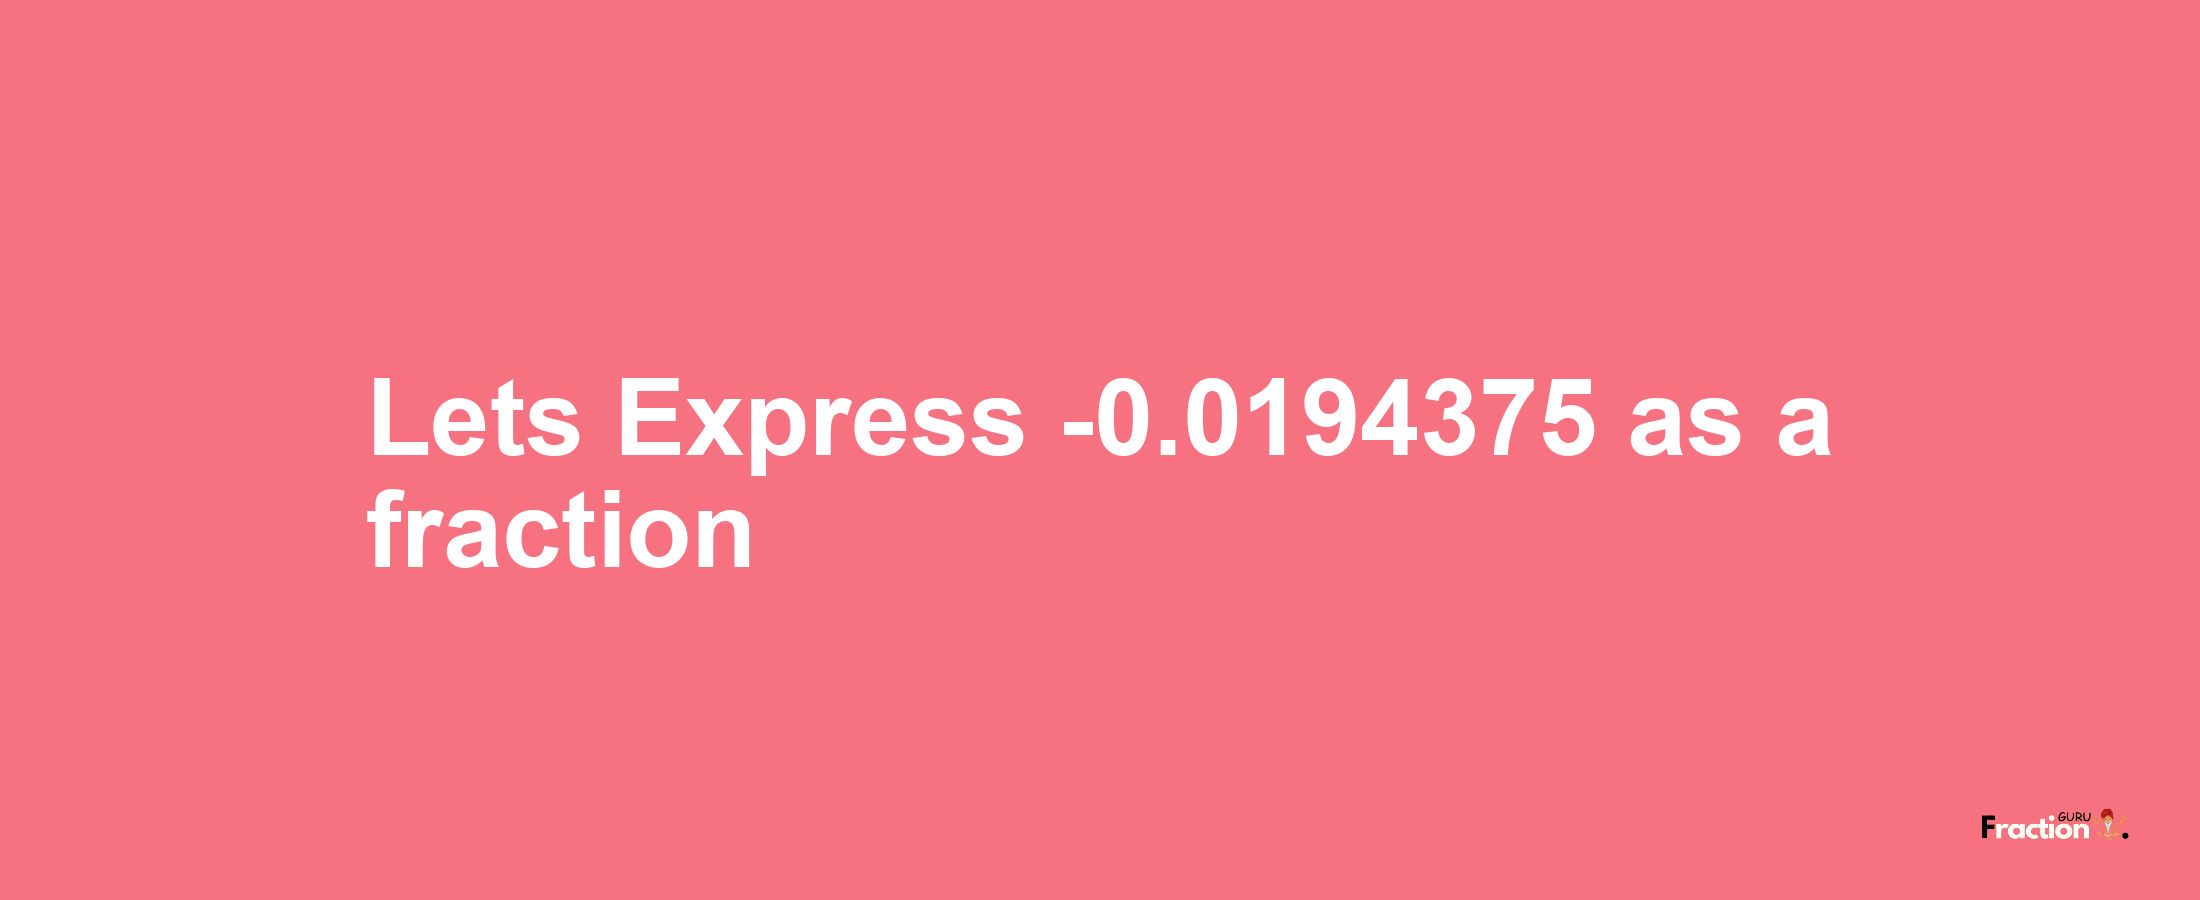 Lets Express -0.0194375 as afraction